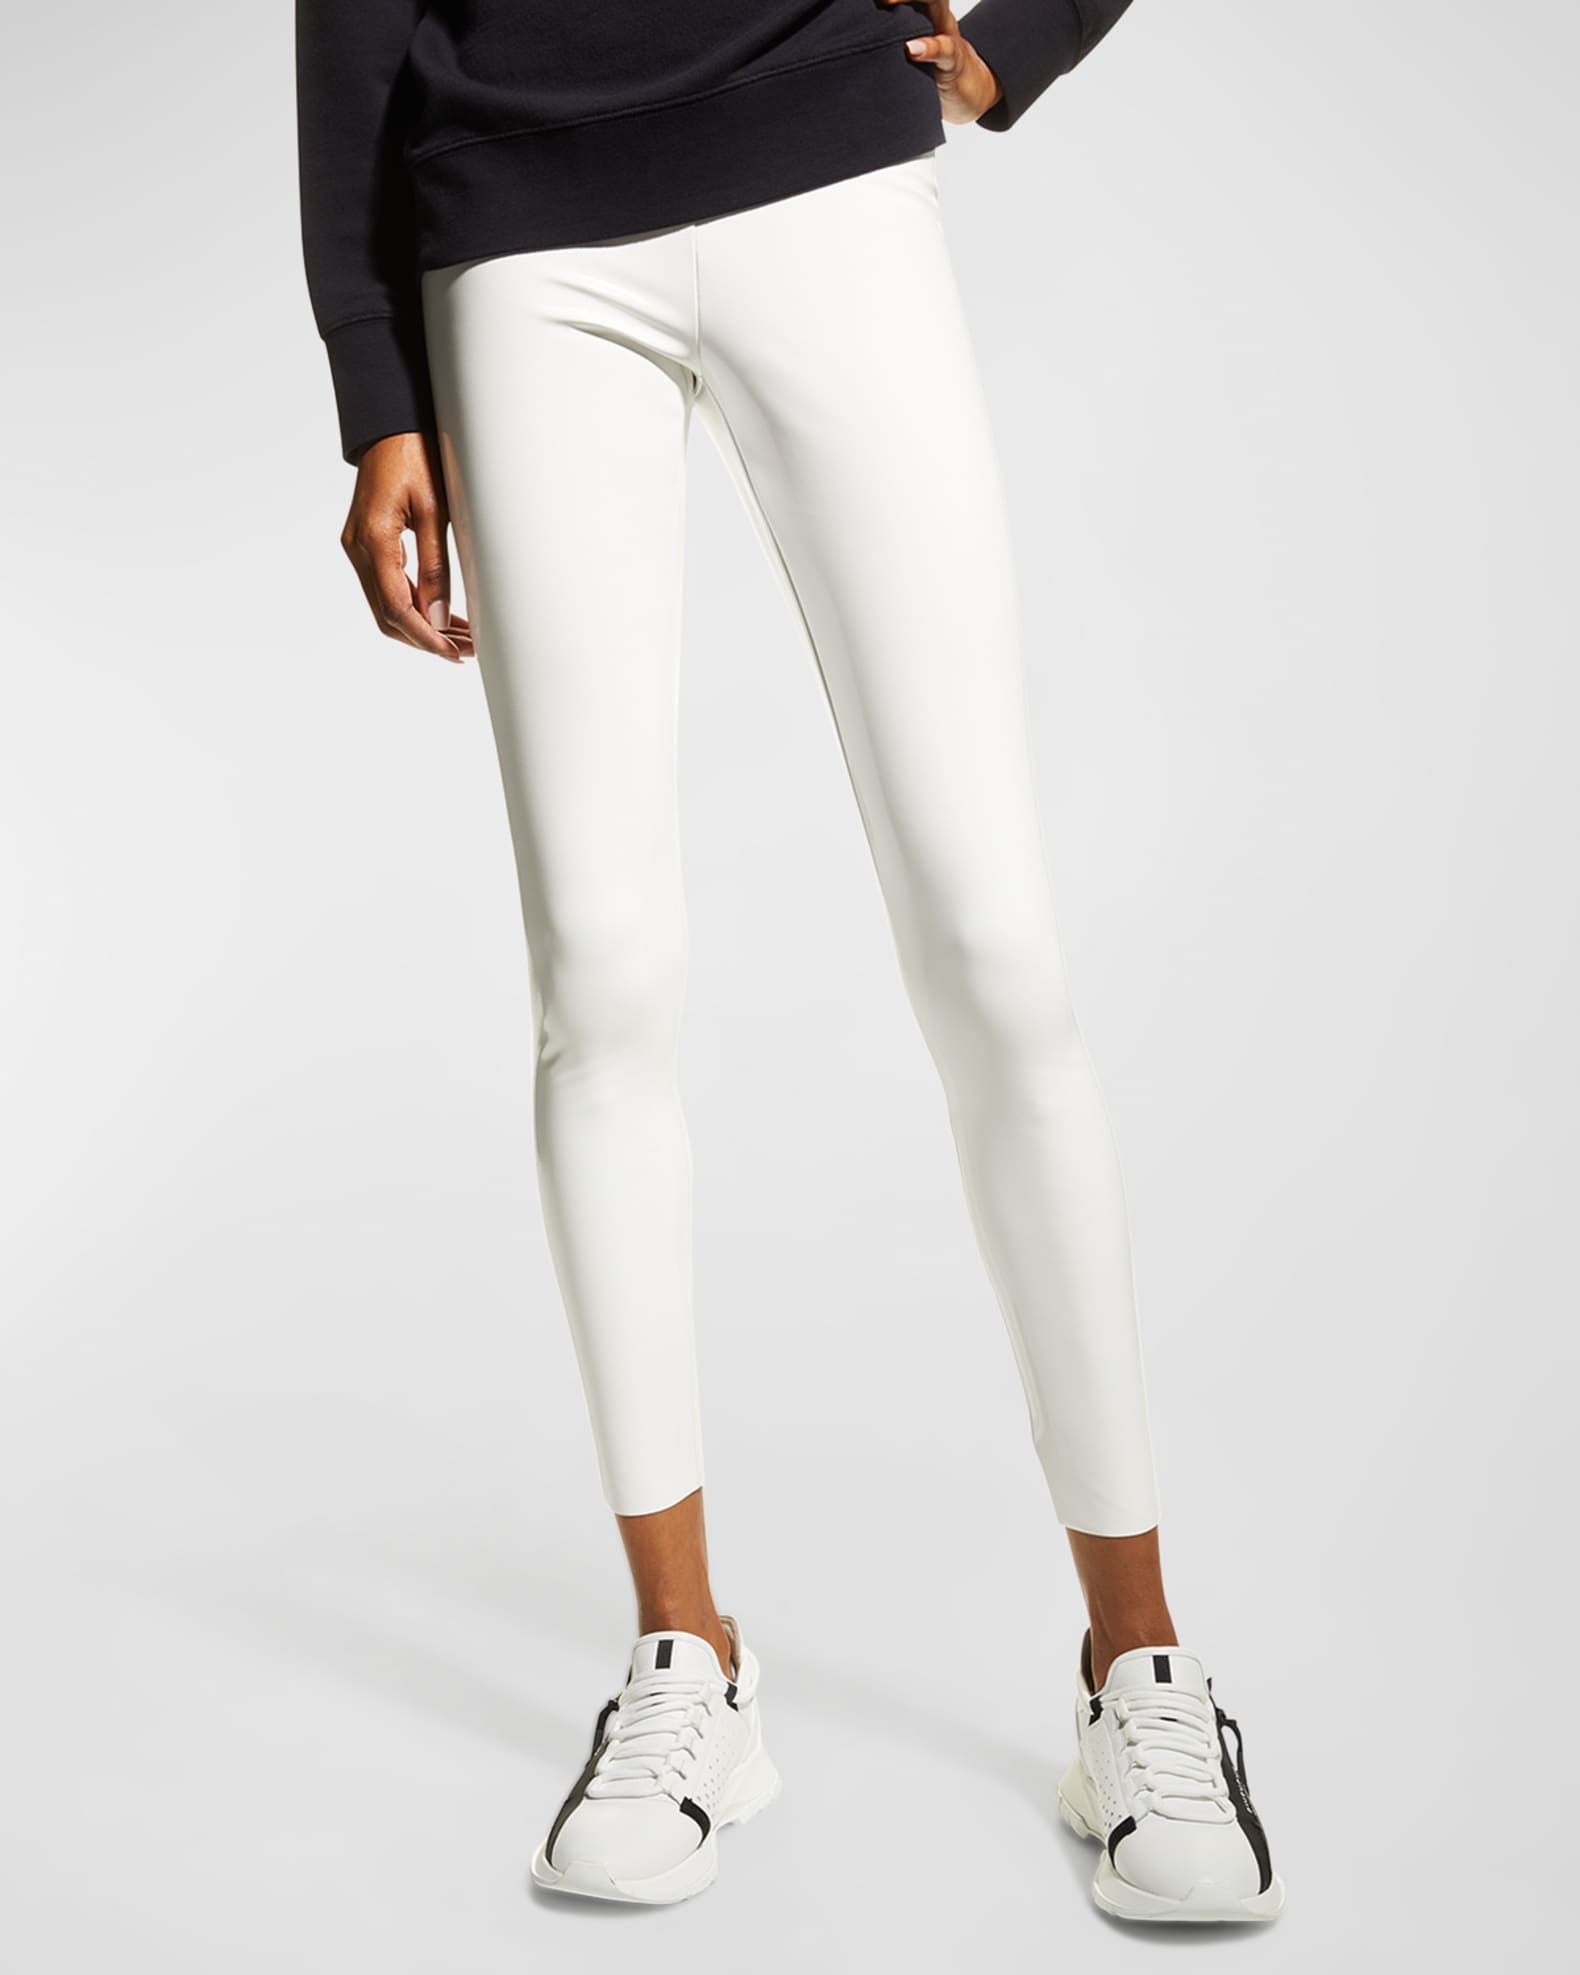 Classic Patent Faux-Leather Firming Leggings